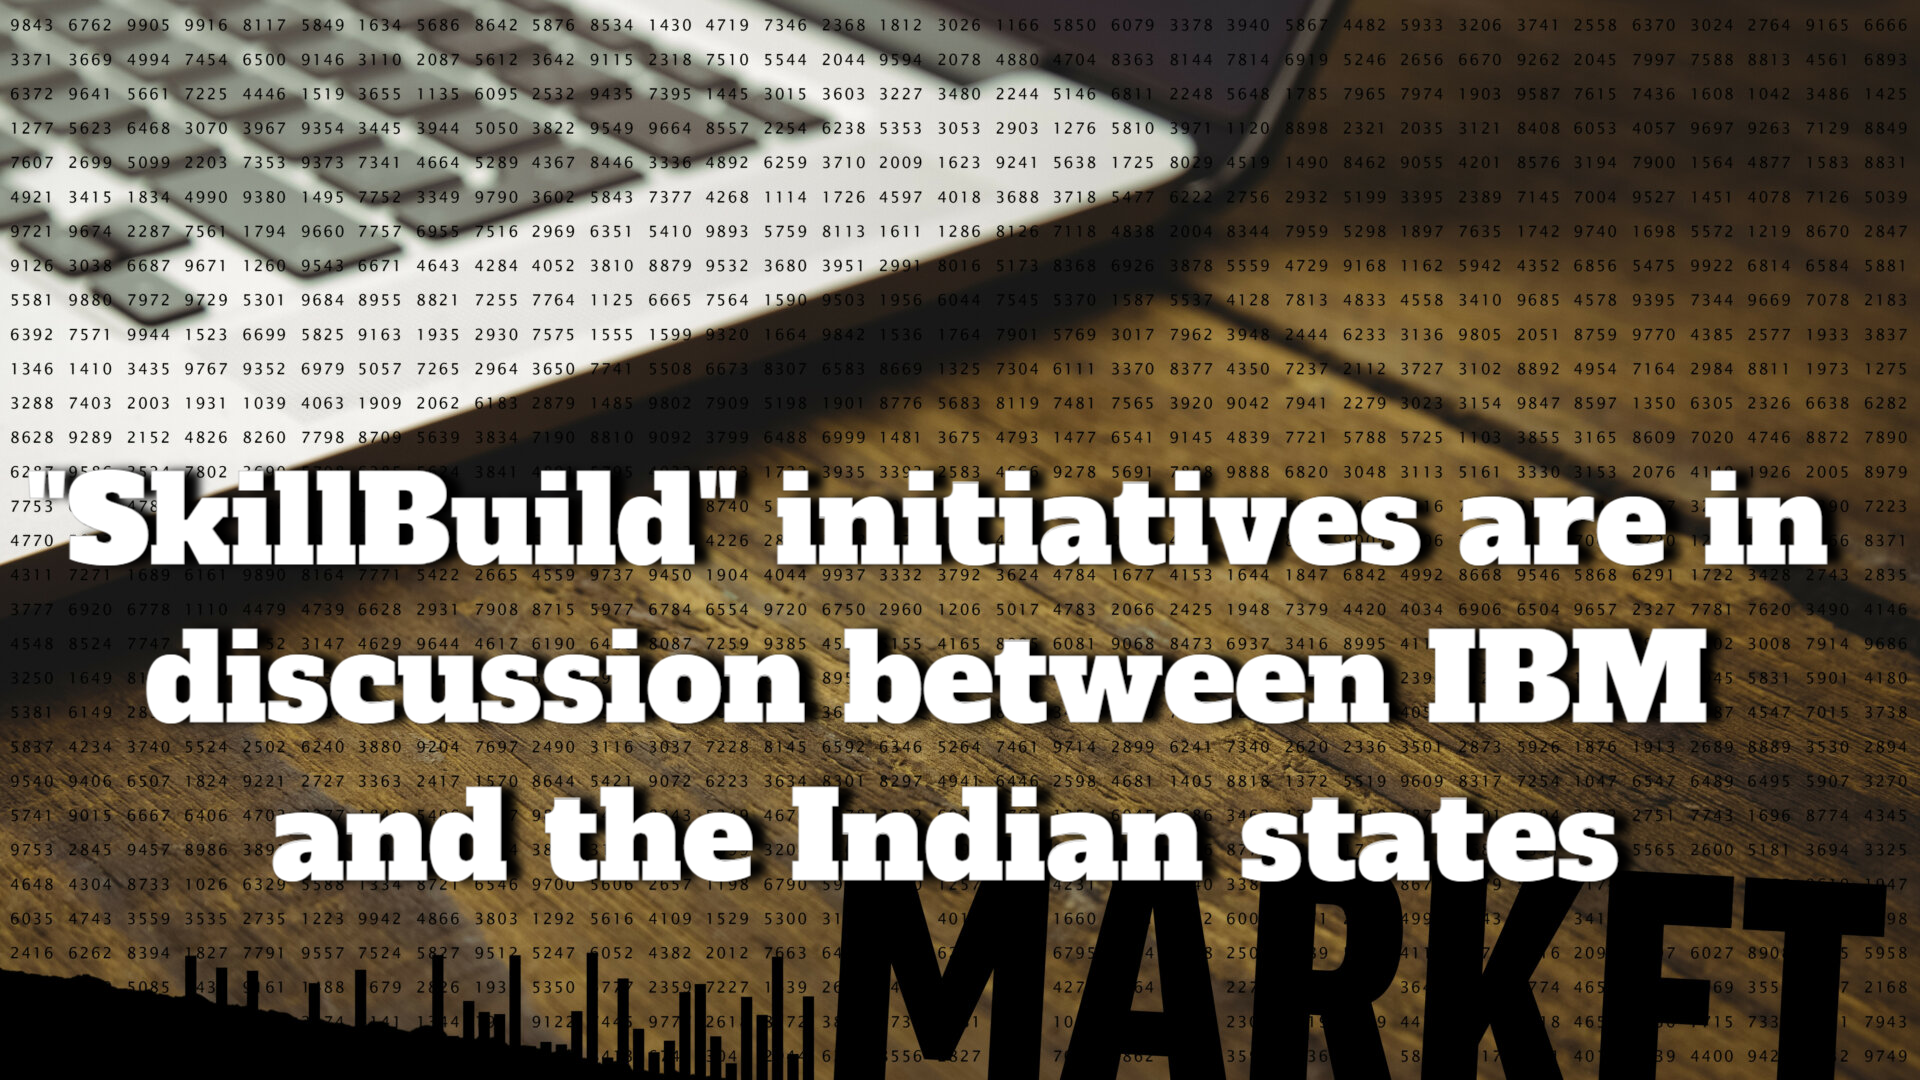 IBM and India’s states are in discussions to expand their “SkillBuild” initiatives